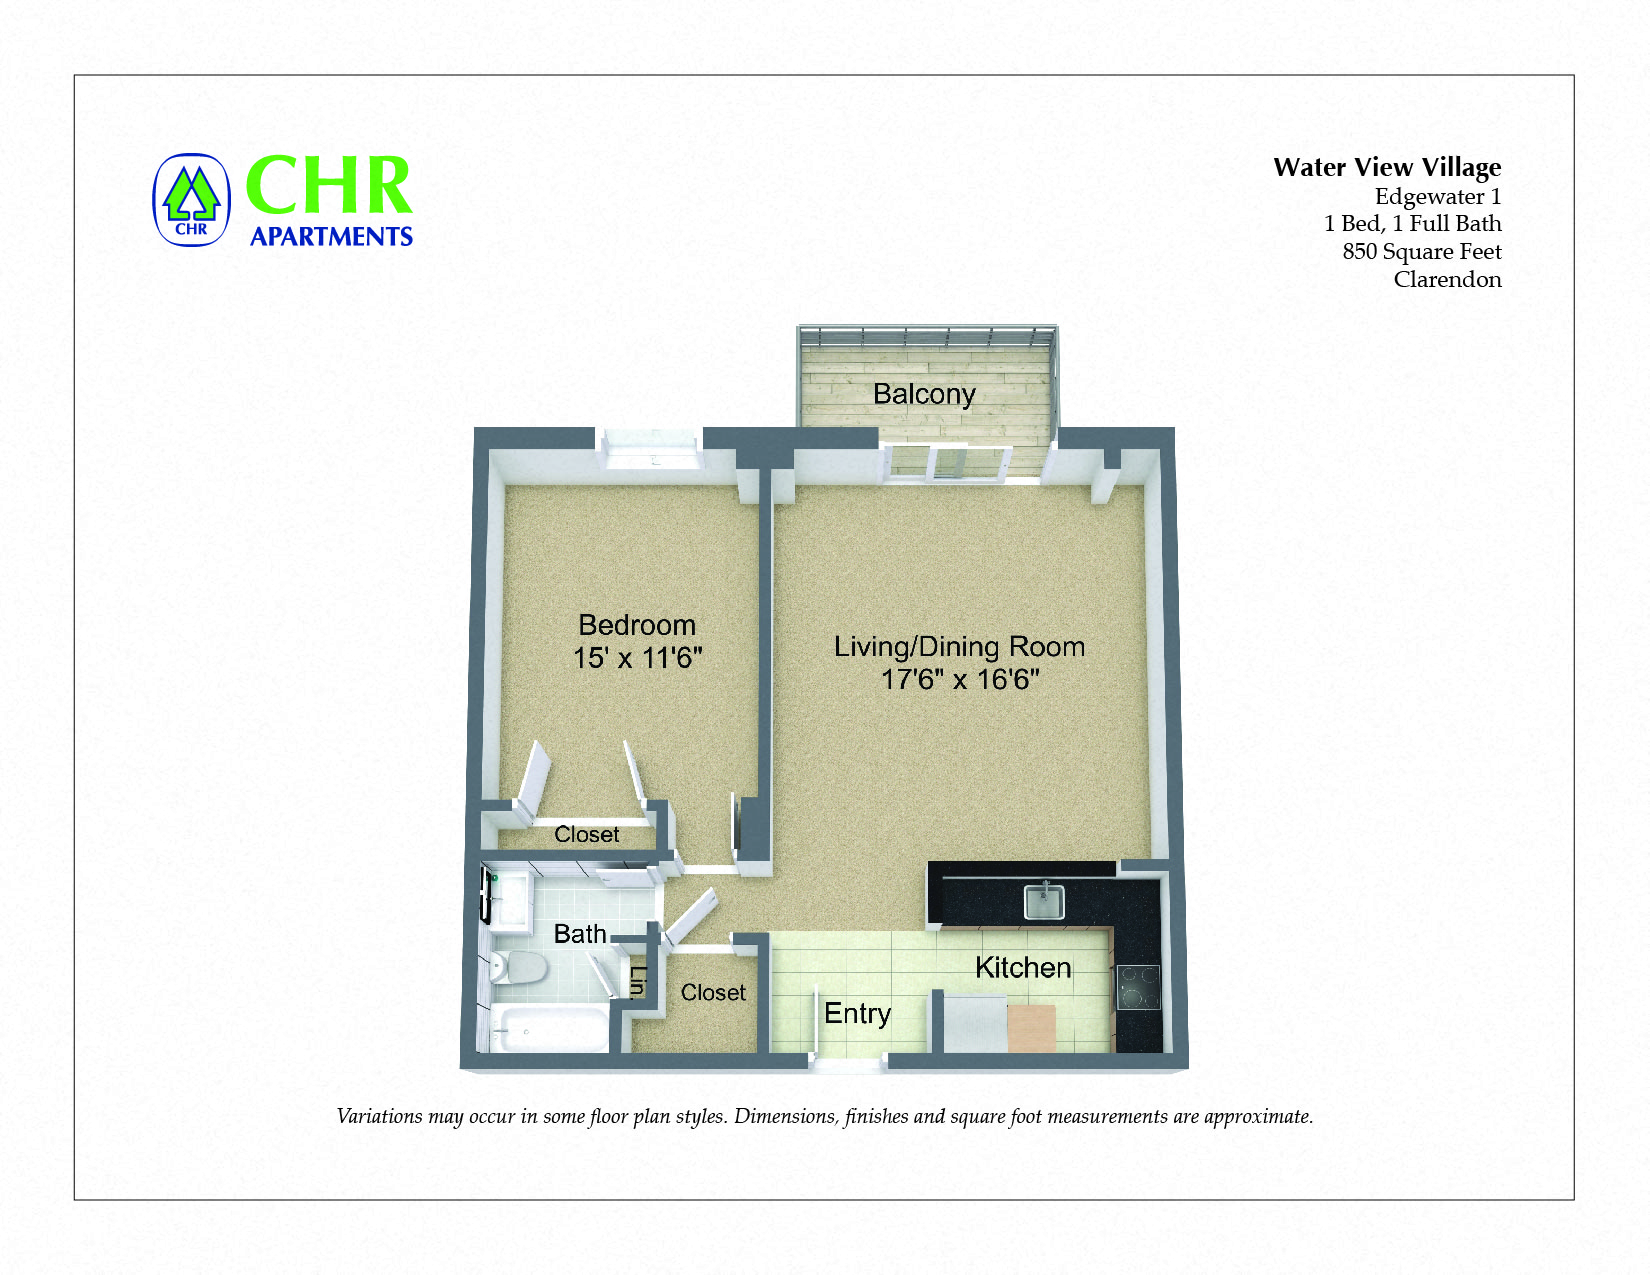 Click to view 1 Bed/1 Bath with Balcony floor plan gallery